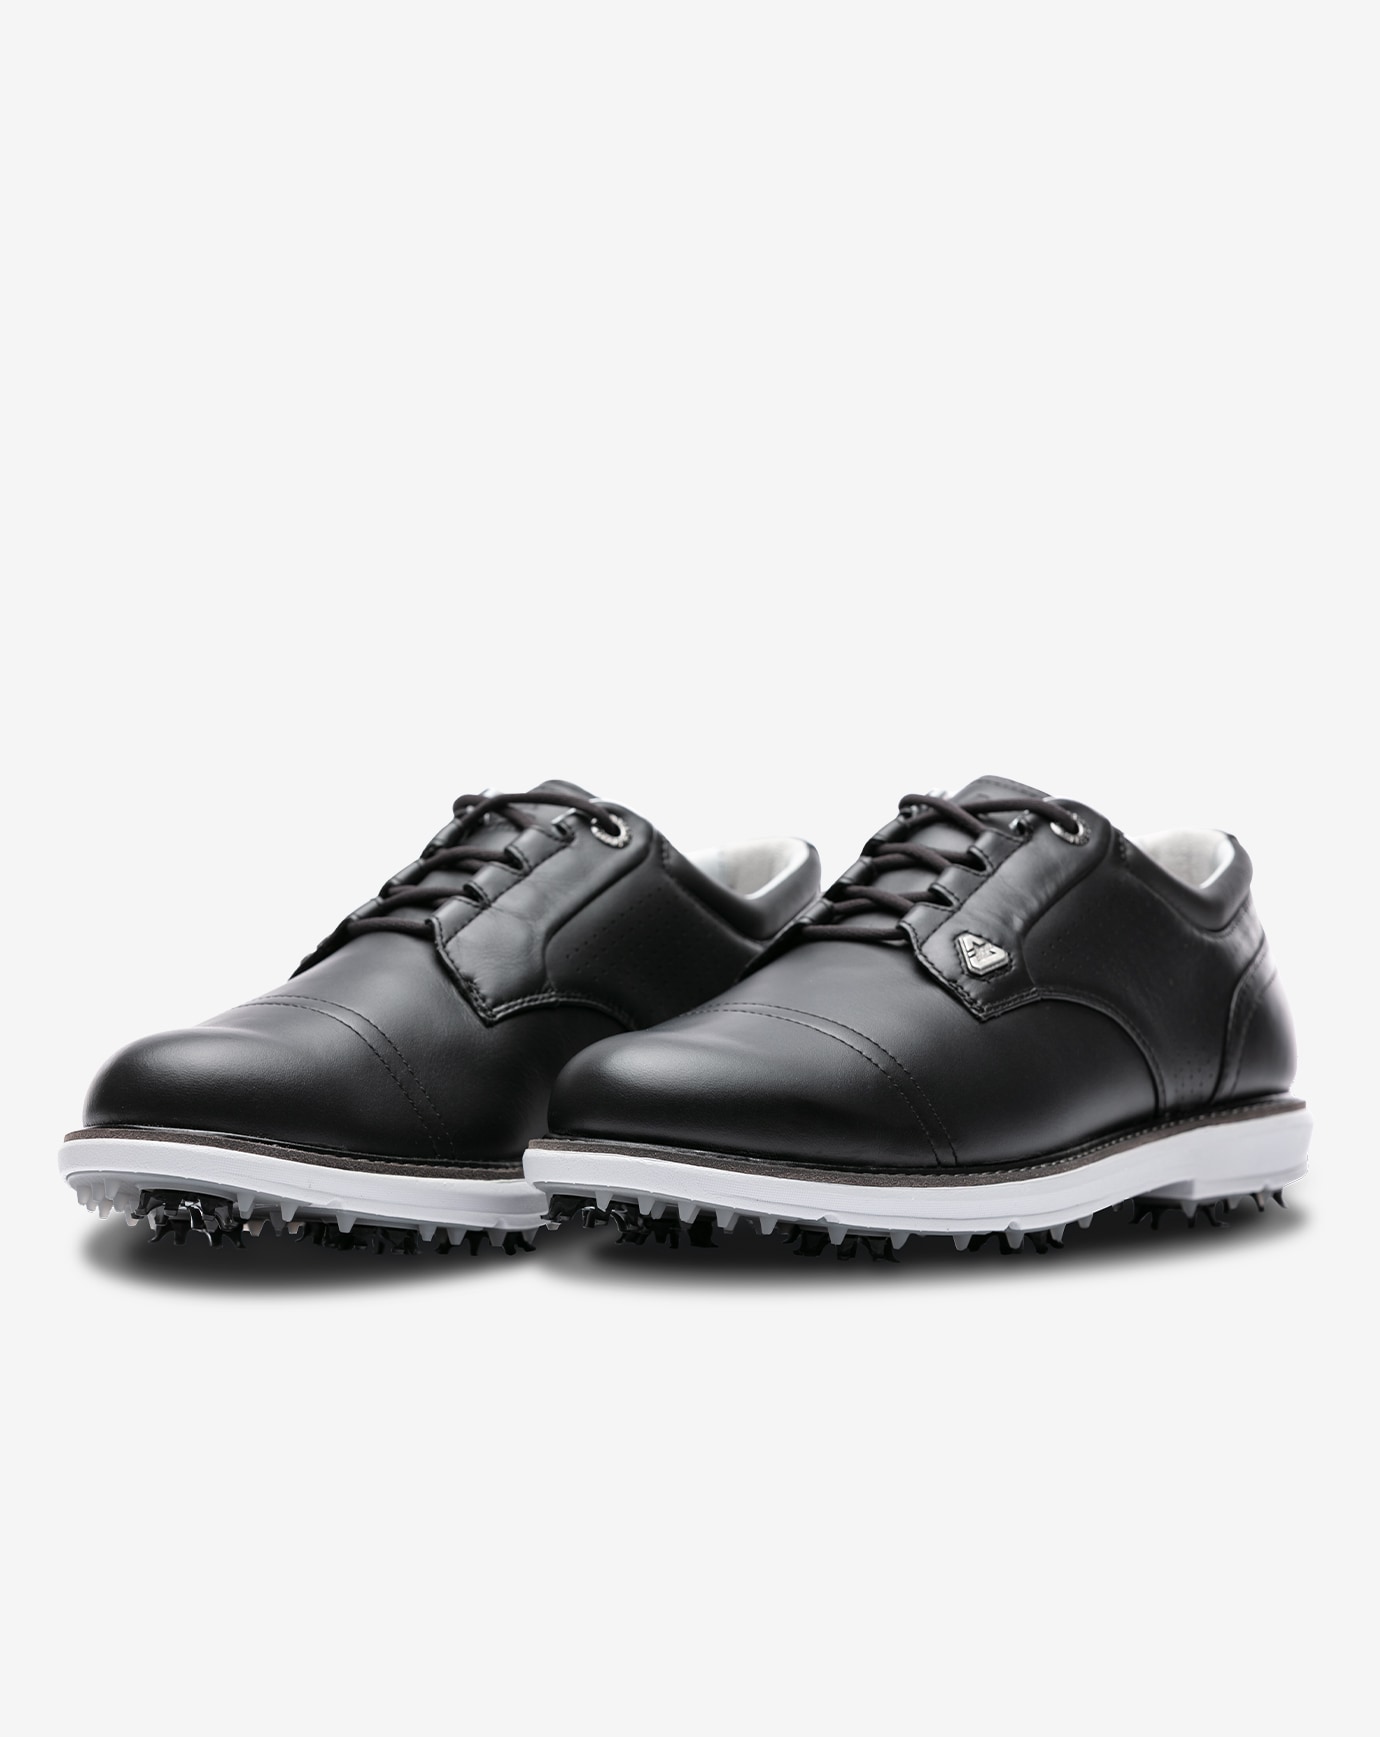 THE LEGEND SPIKED GOLF SHOE Image Thumbnail 5